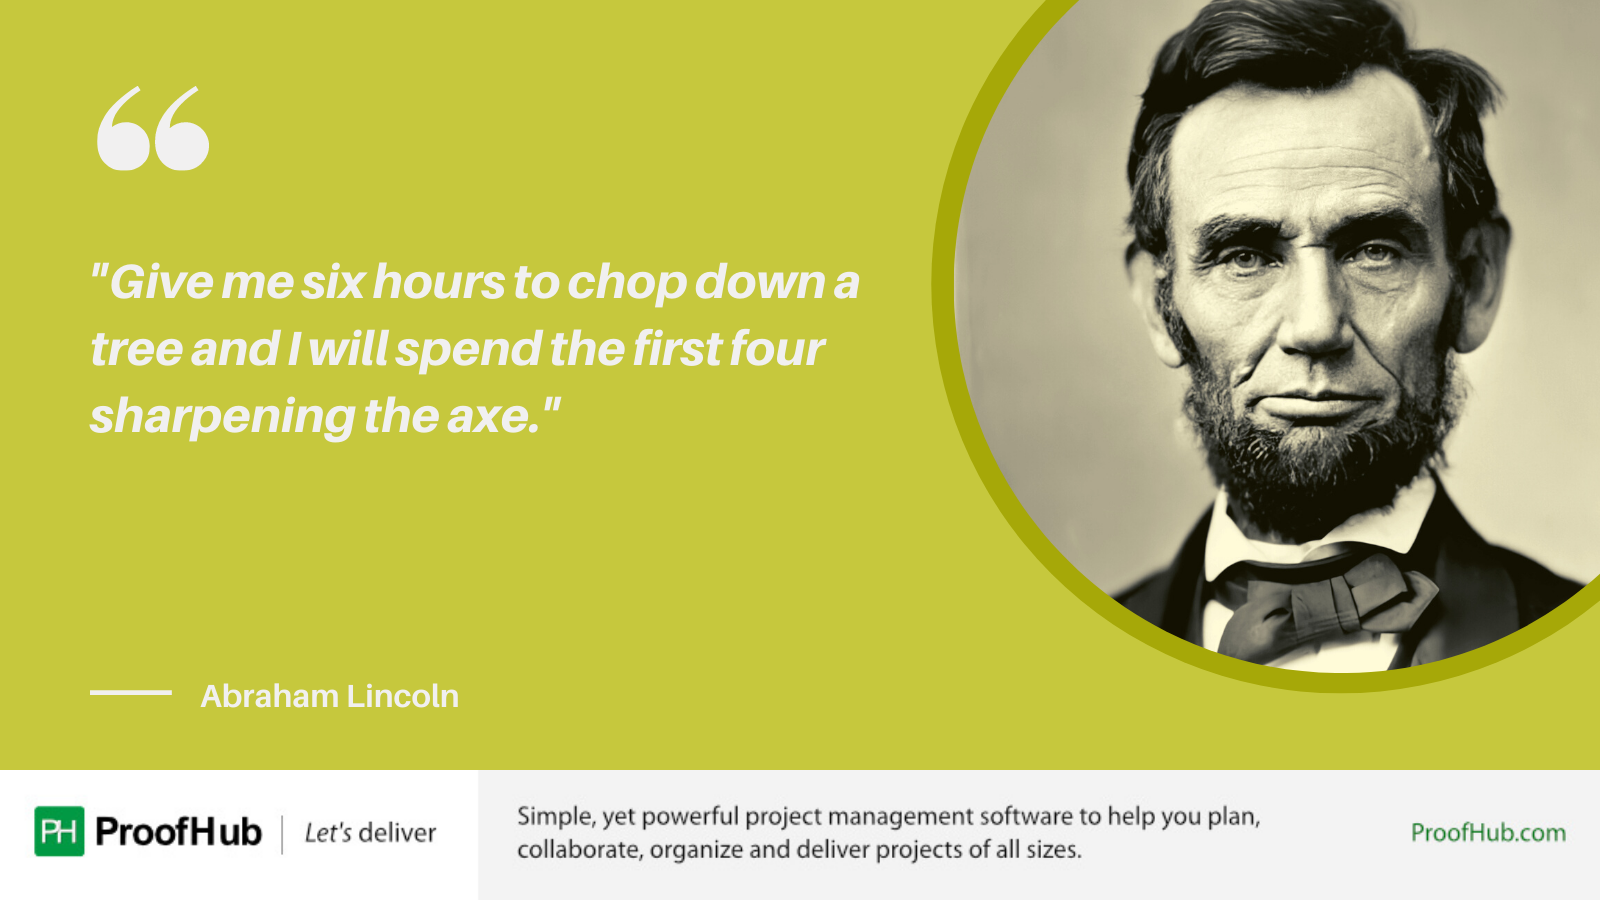 Give me six hours to chop down a tree and I will spend the first four sharpening the axe Quote by Abraham Lincoln